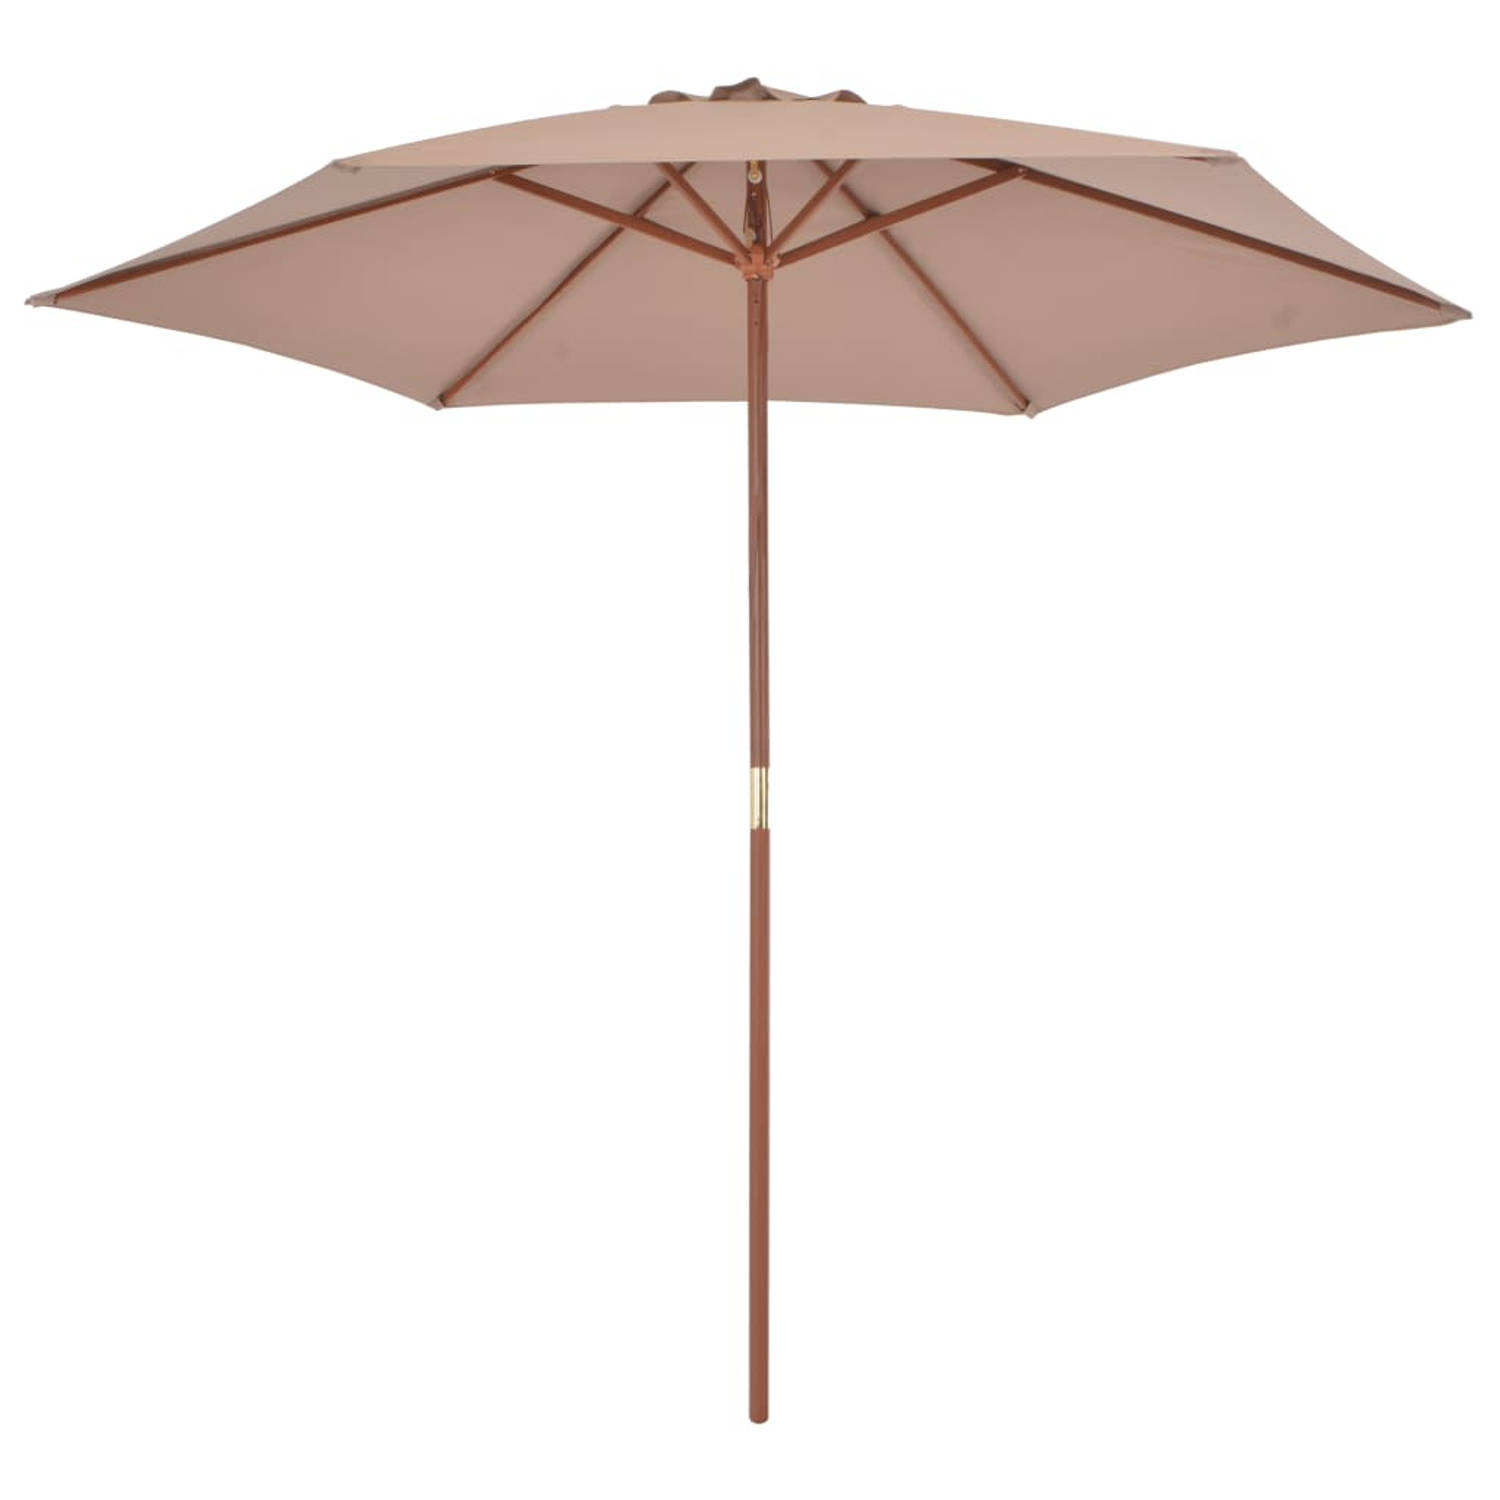 The Living Store Parasol - Houten - Polyester - Ø270 cm x 244 cm - Taupe